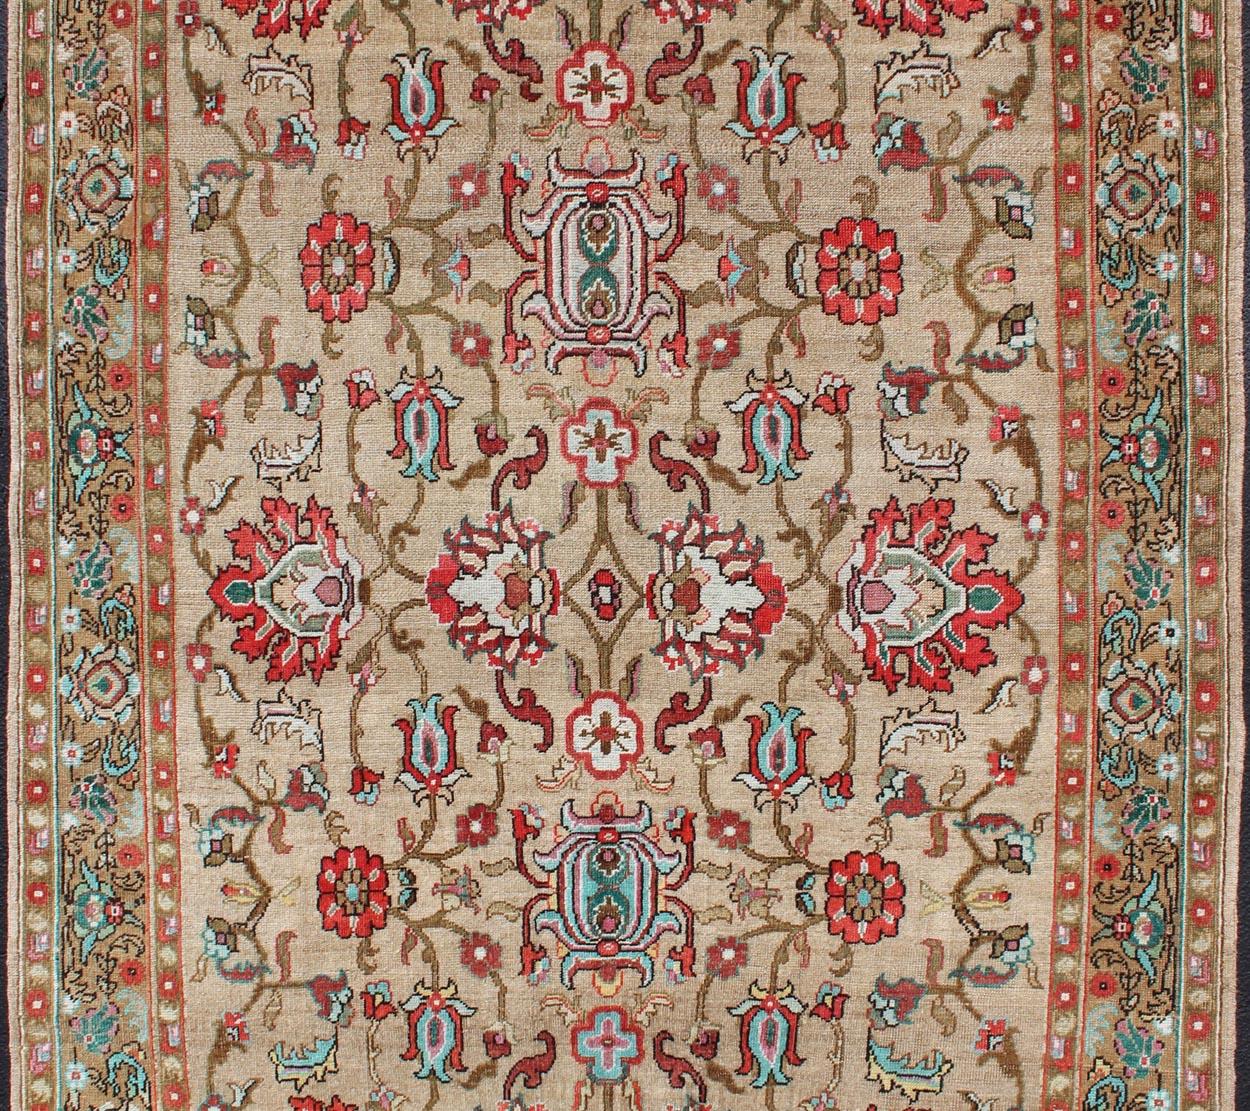 Tan and red tribal all-over design Oushak vintage rug from Turkey, rug TU-MTU-4934, country of origin / type: Turkey / Oushak, circa 1930.

This magnificent vintage Turkish Oushak displays a glorious coloration paired with a beautiful and vibrant